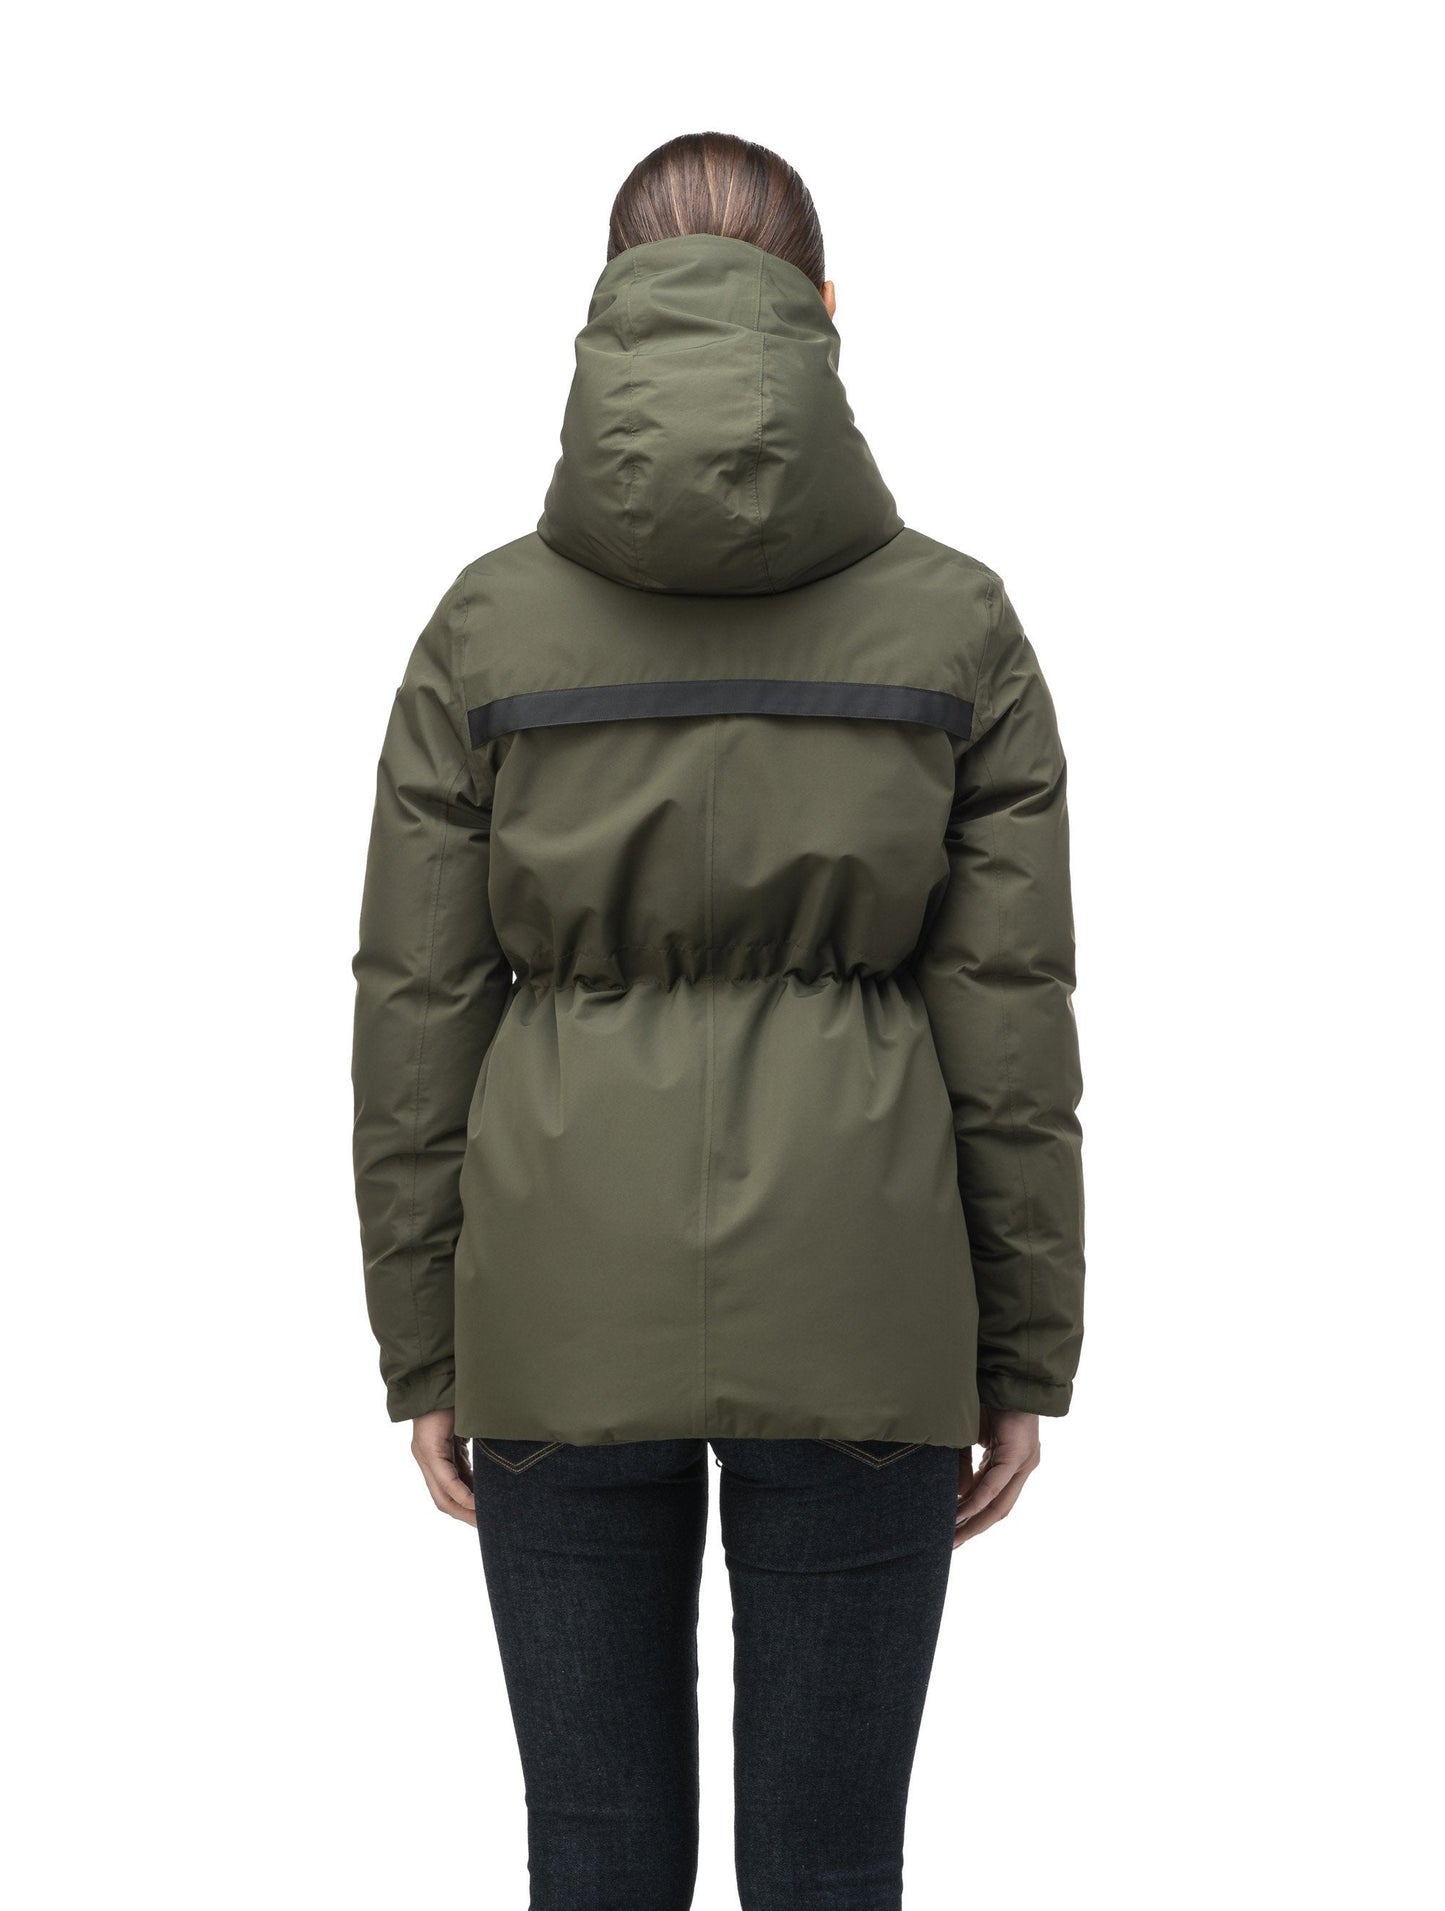 Hip length, reversible women's down filled jacket with waterproof exposed zipper in Fatigue